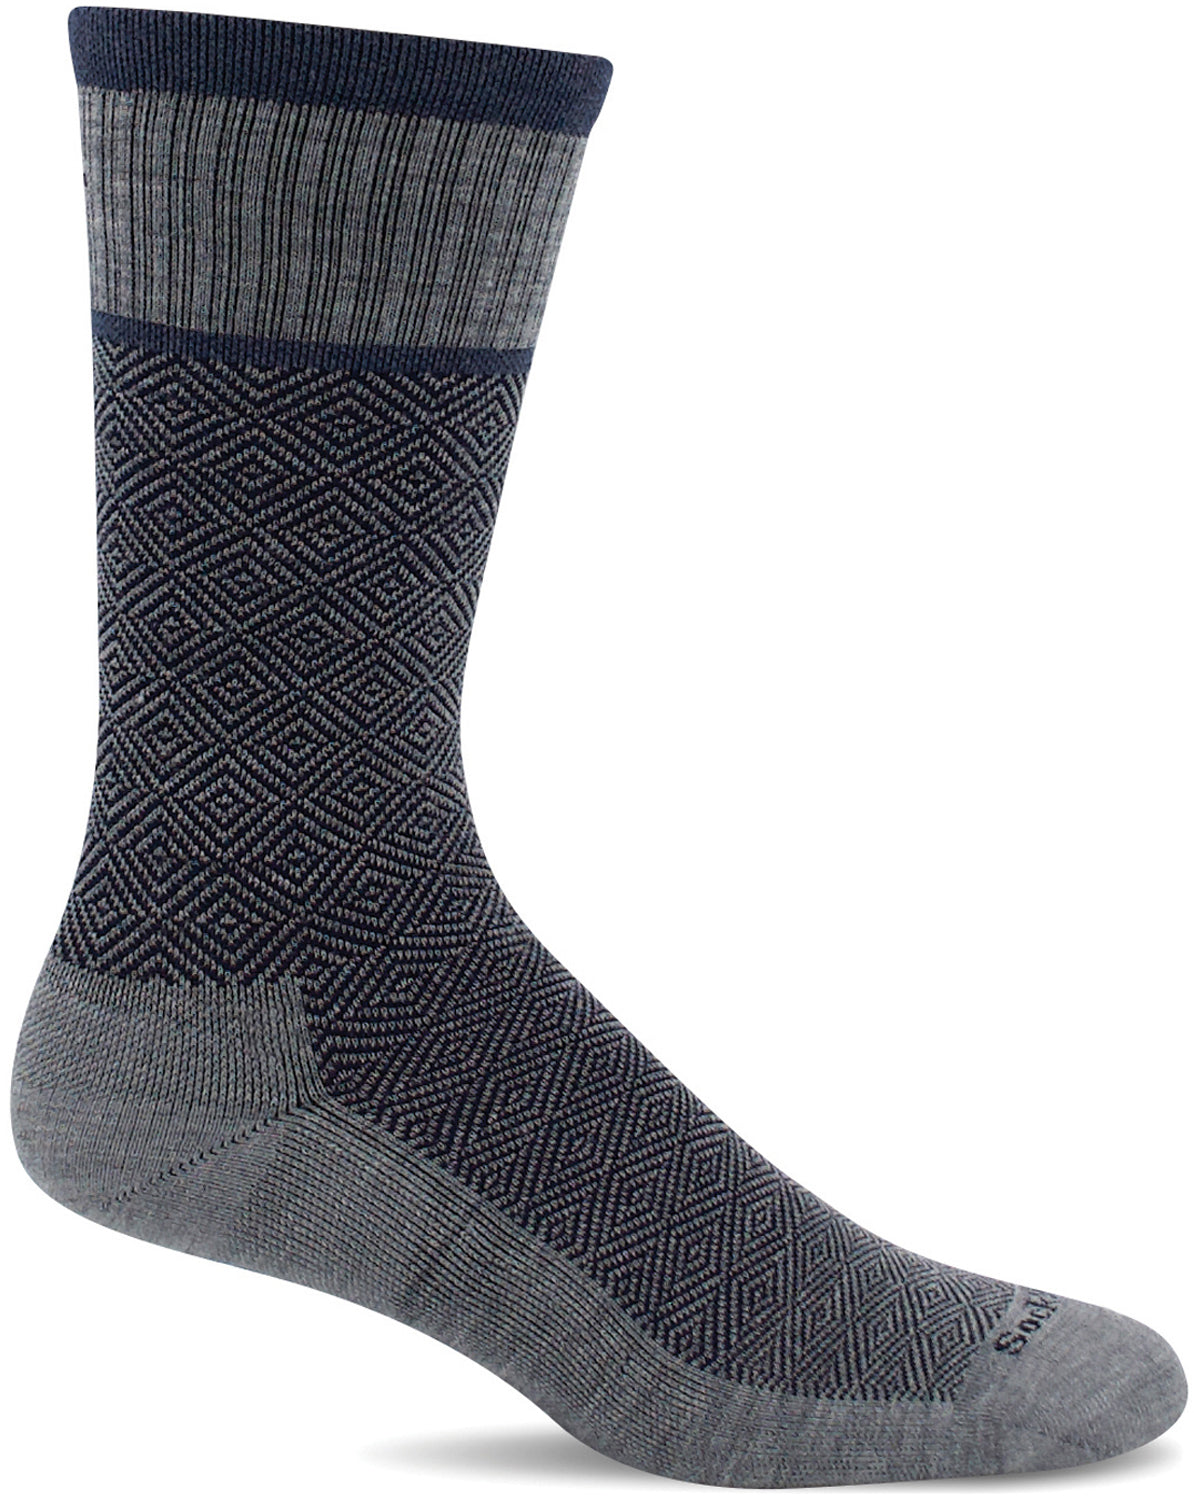 Sockwell Men's Plantar Cush Crew Sock in Grey color from the side